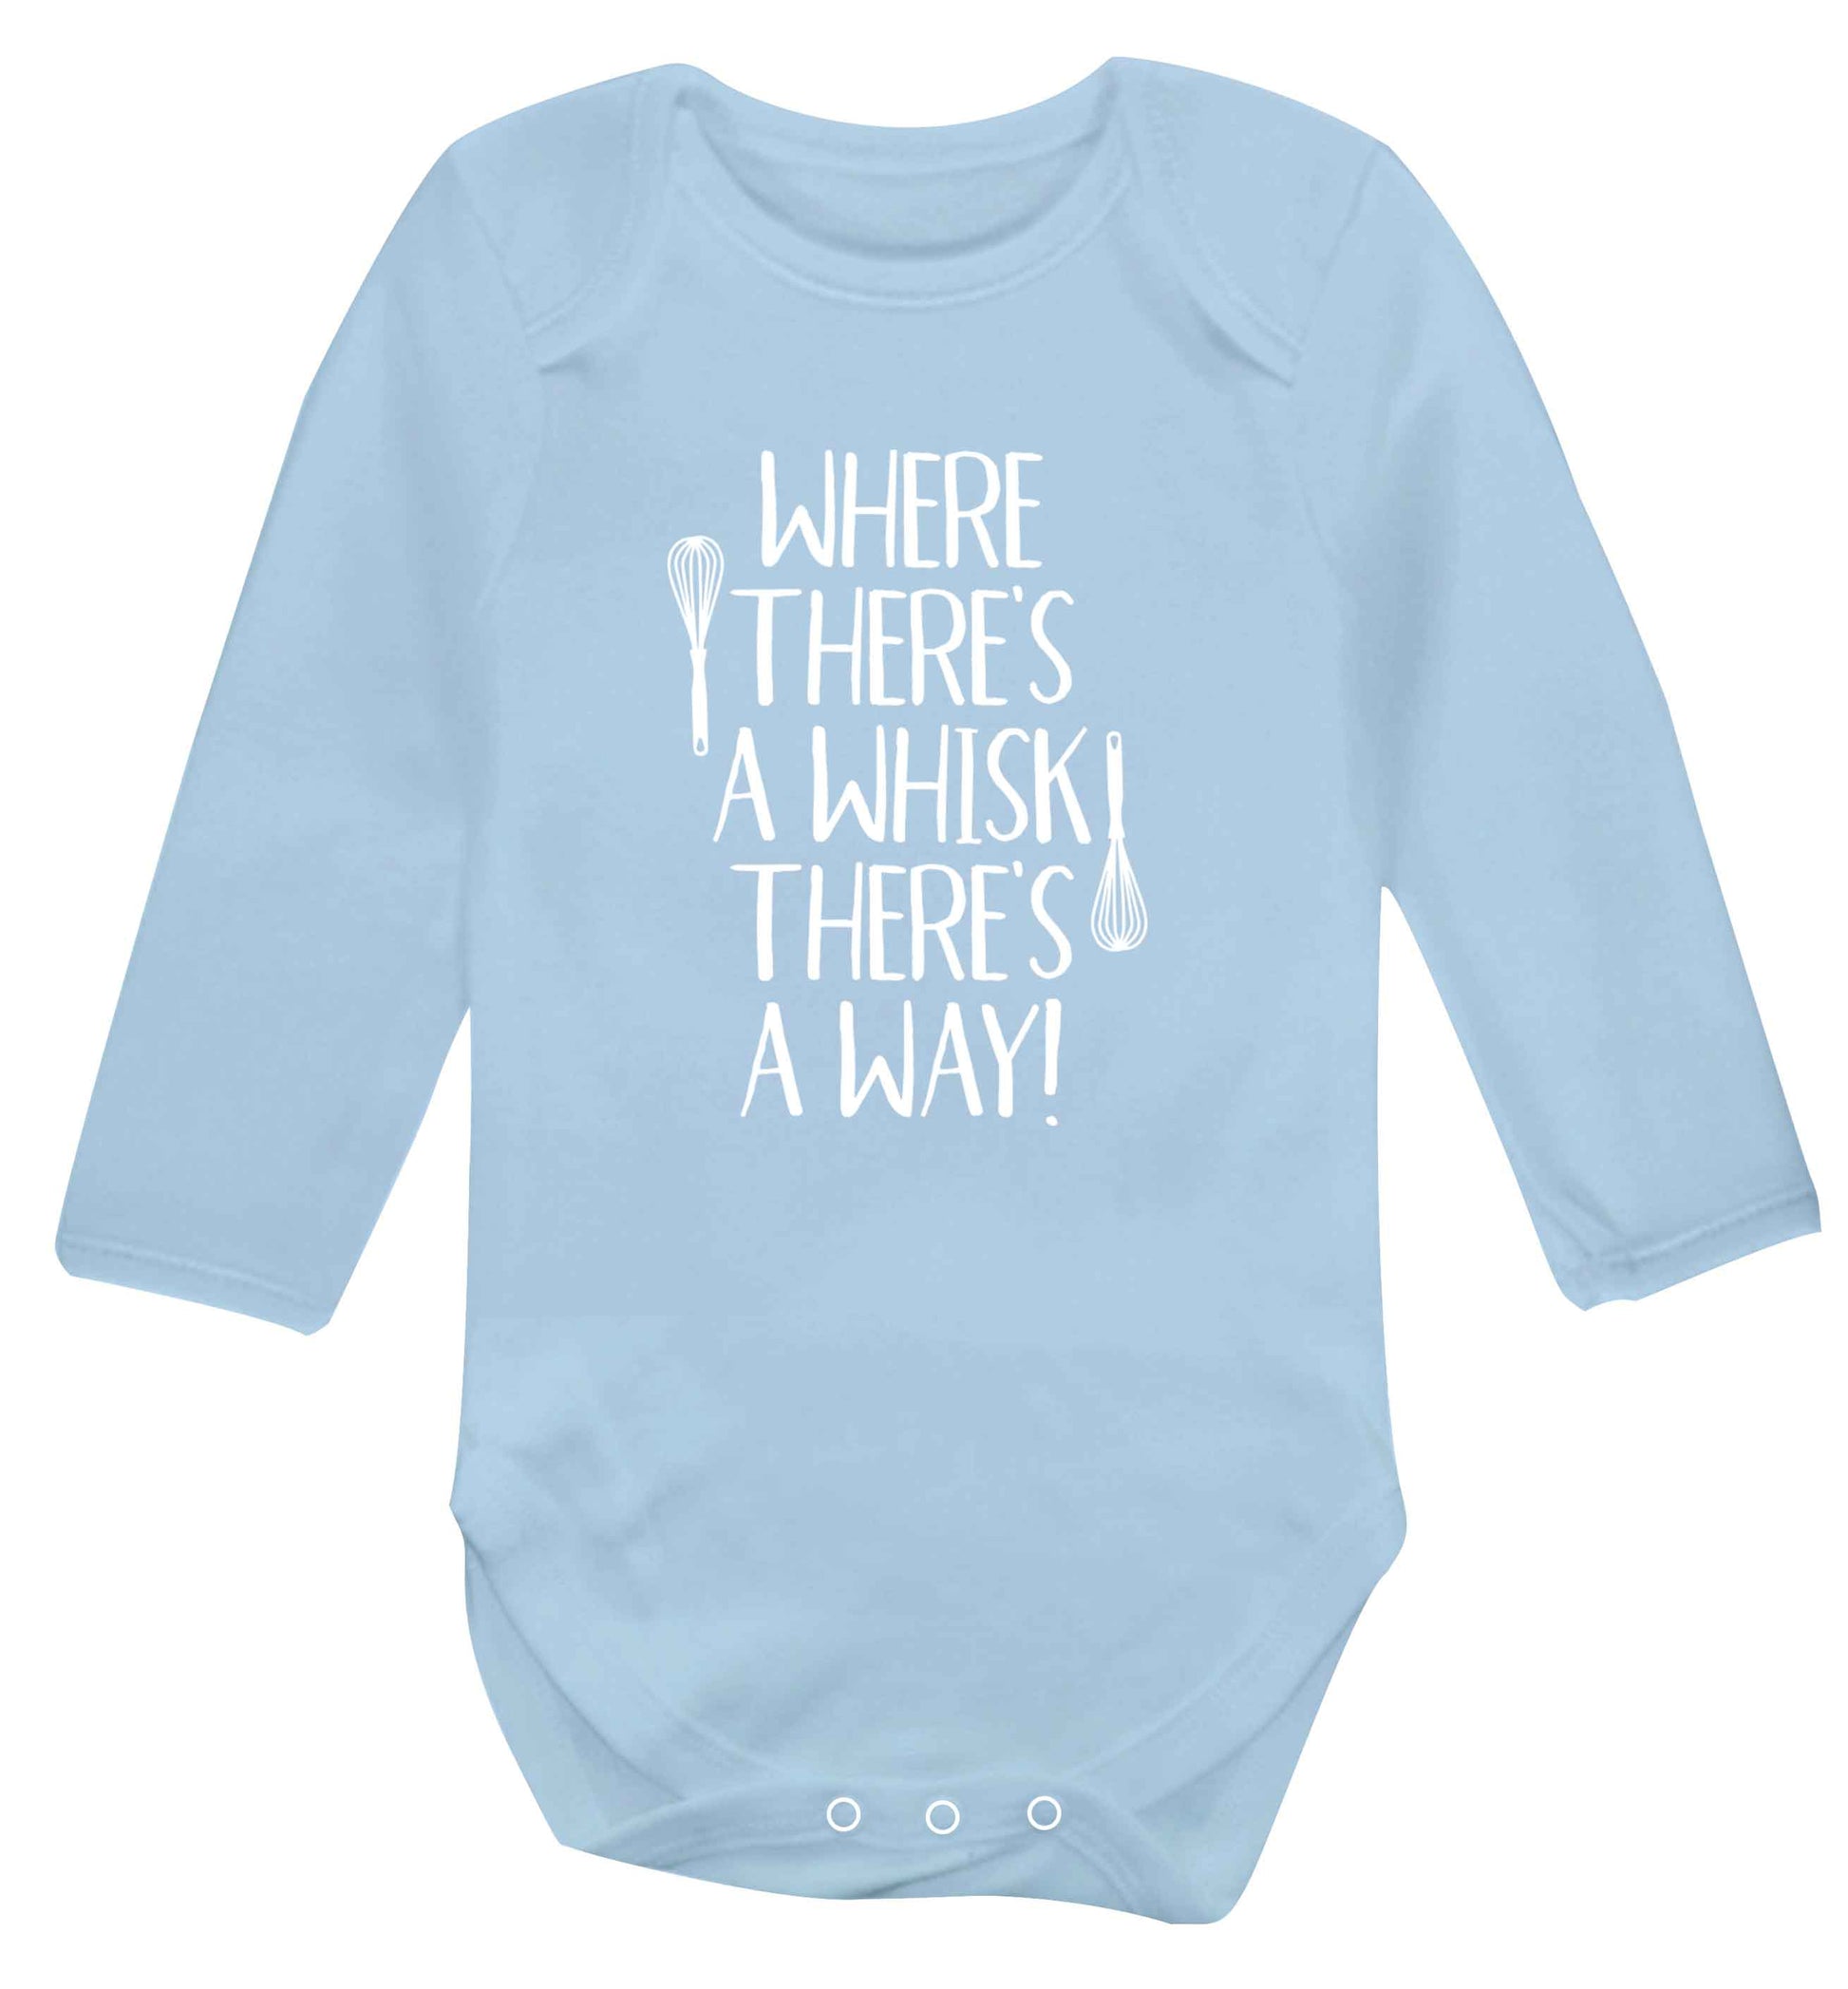 Where there's a whisk there's a way Baby Vest long sleeved pale blue 6-12 months